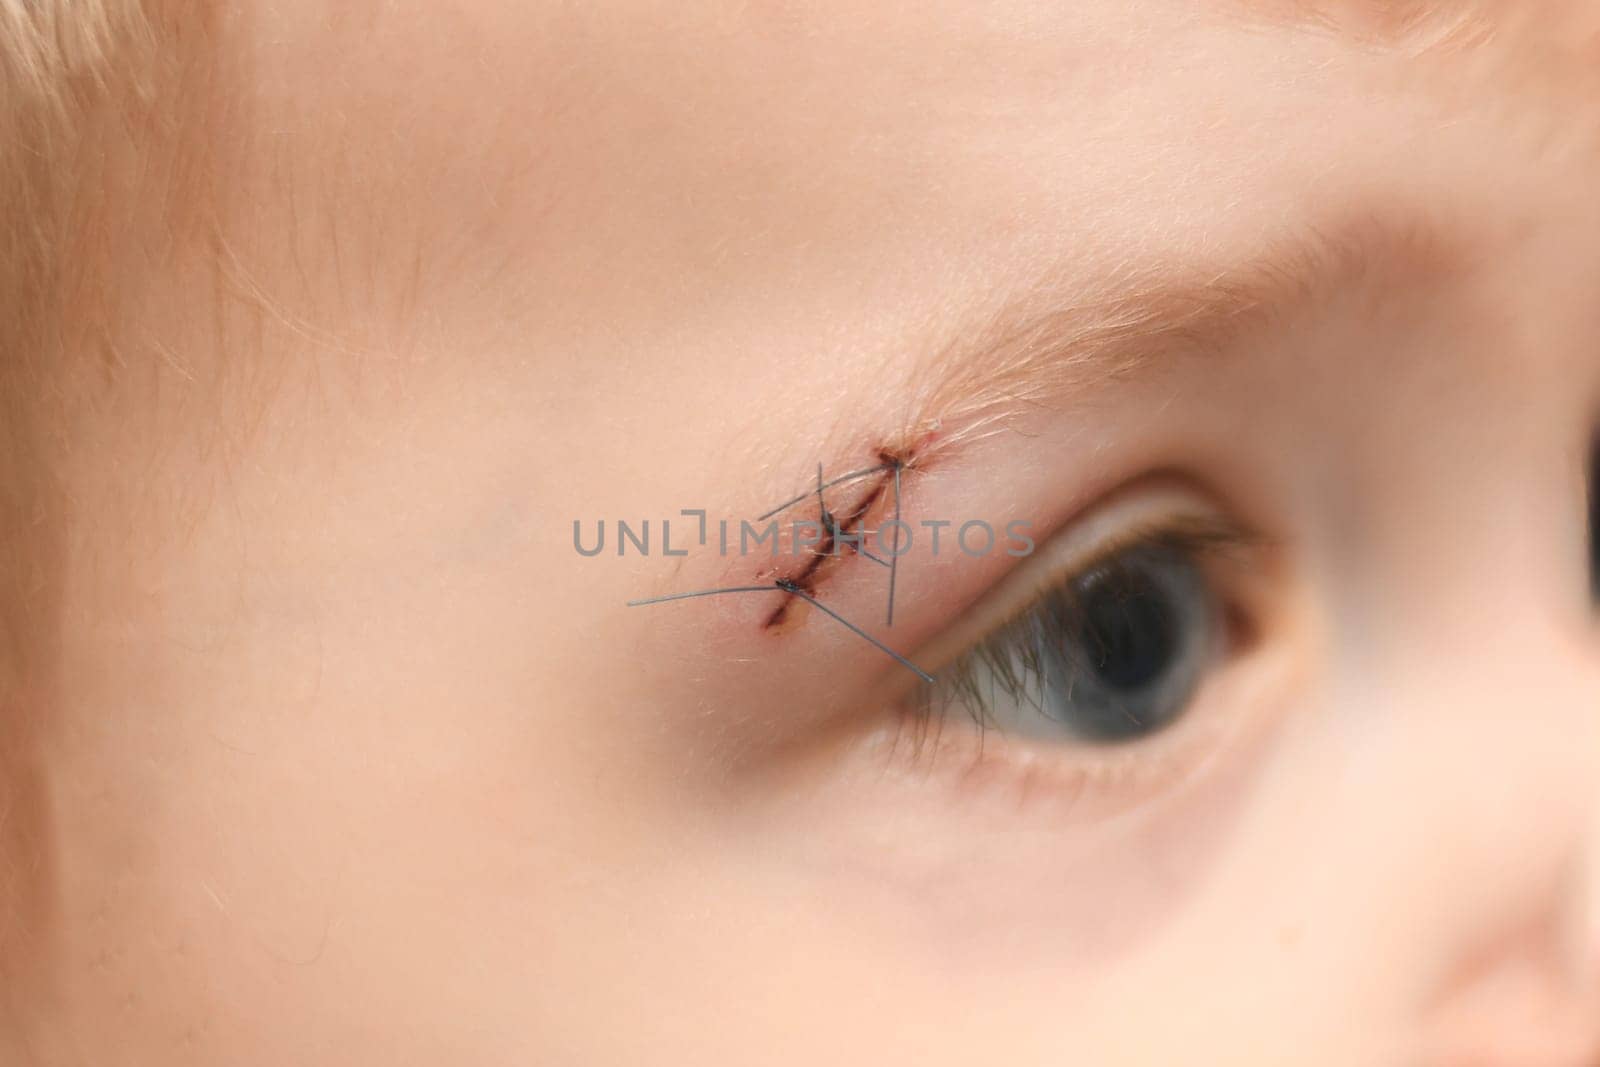 Wound on the eyebrow of a kid after a bruise by Godi